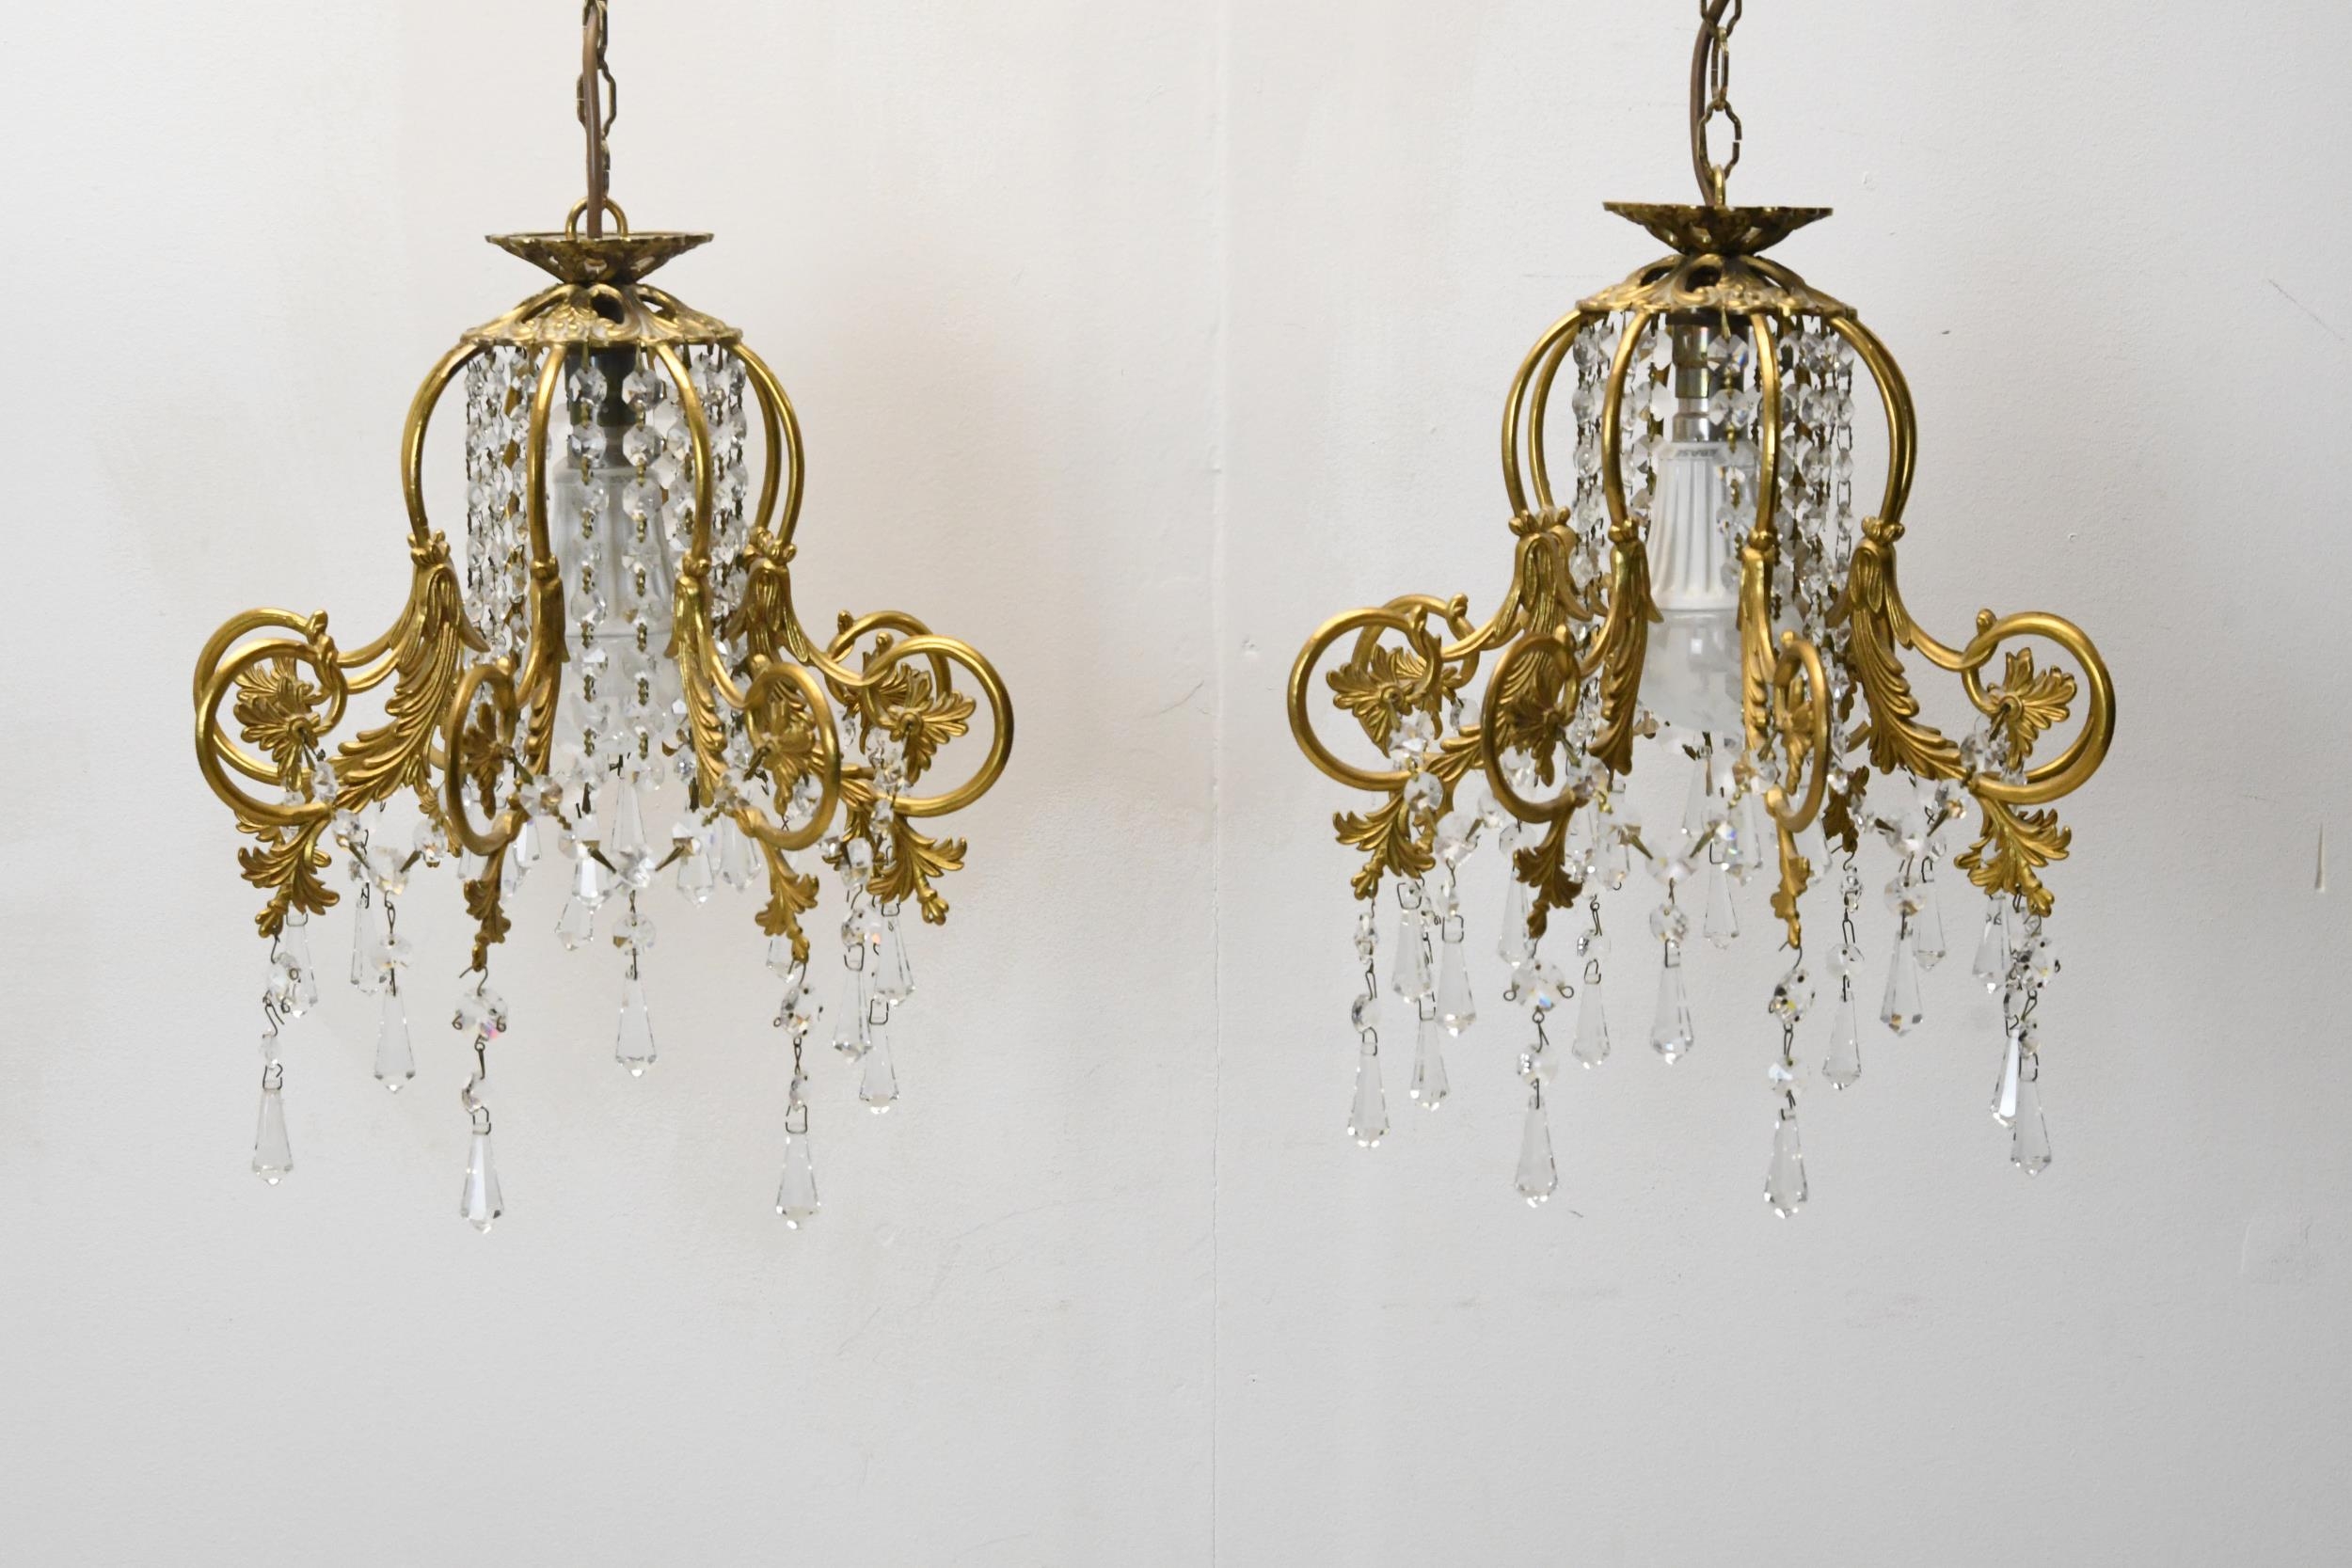 A pair of hanging ceiling lights with scrolling gilt metal frames and crystal drops. H.62 W.30